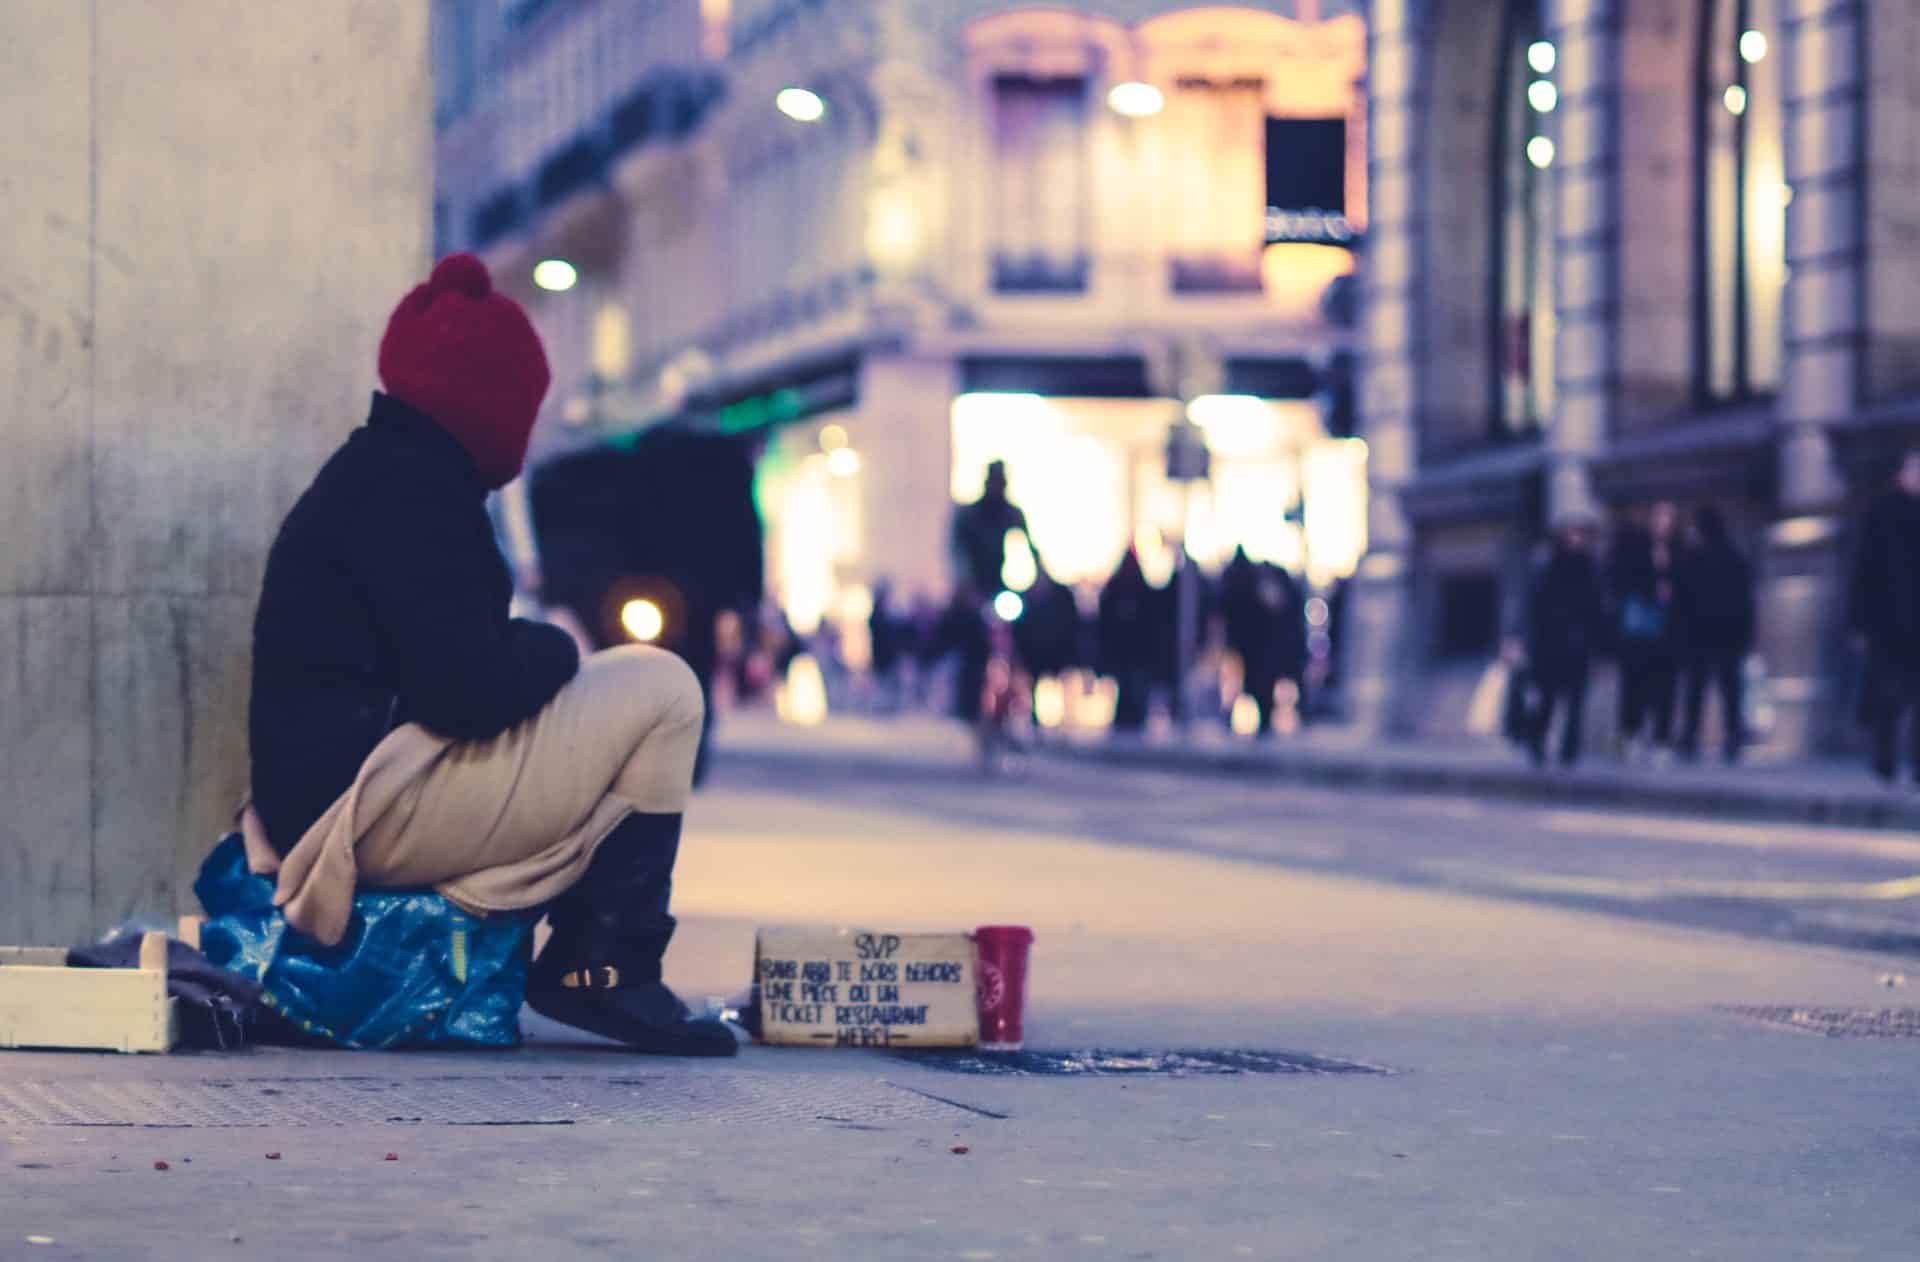 A homeless man sits at the street corner, showing the human need that integral ecology seeks to answer